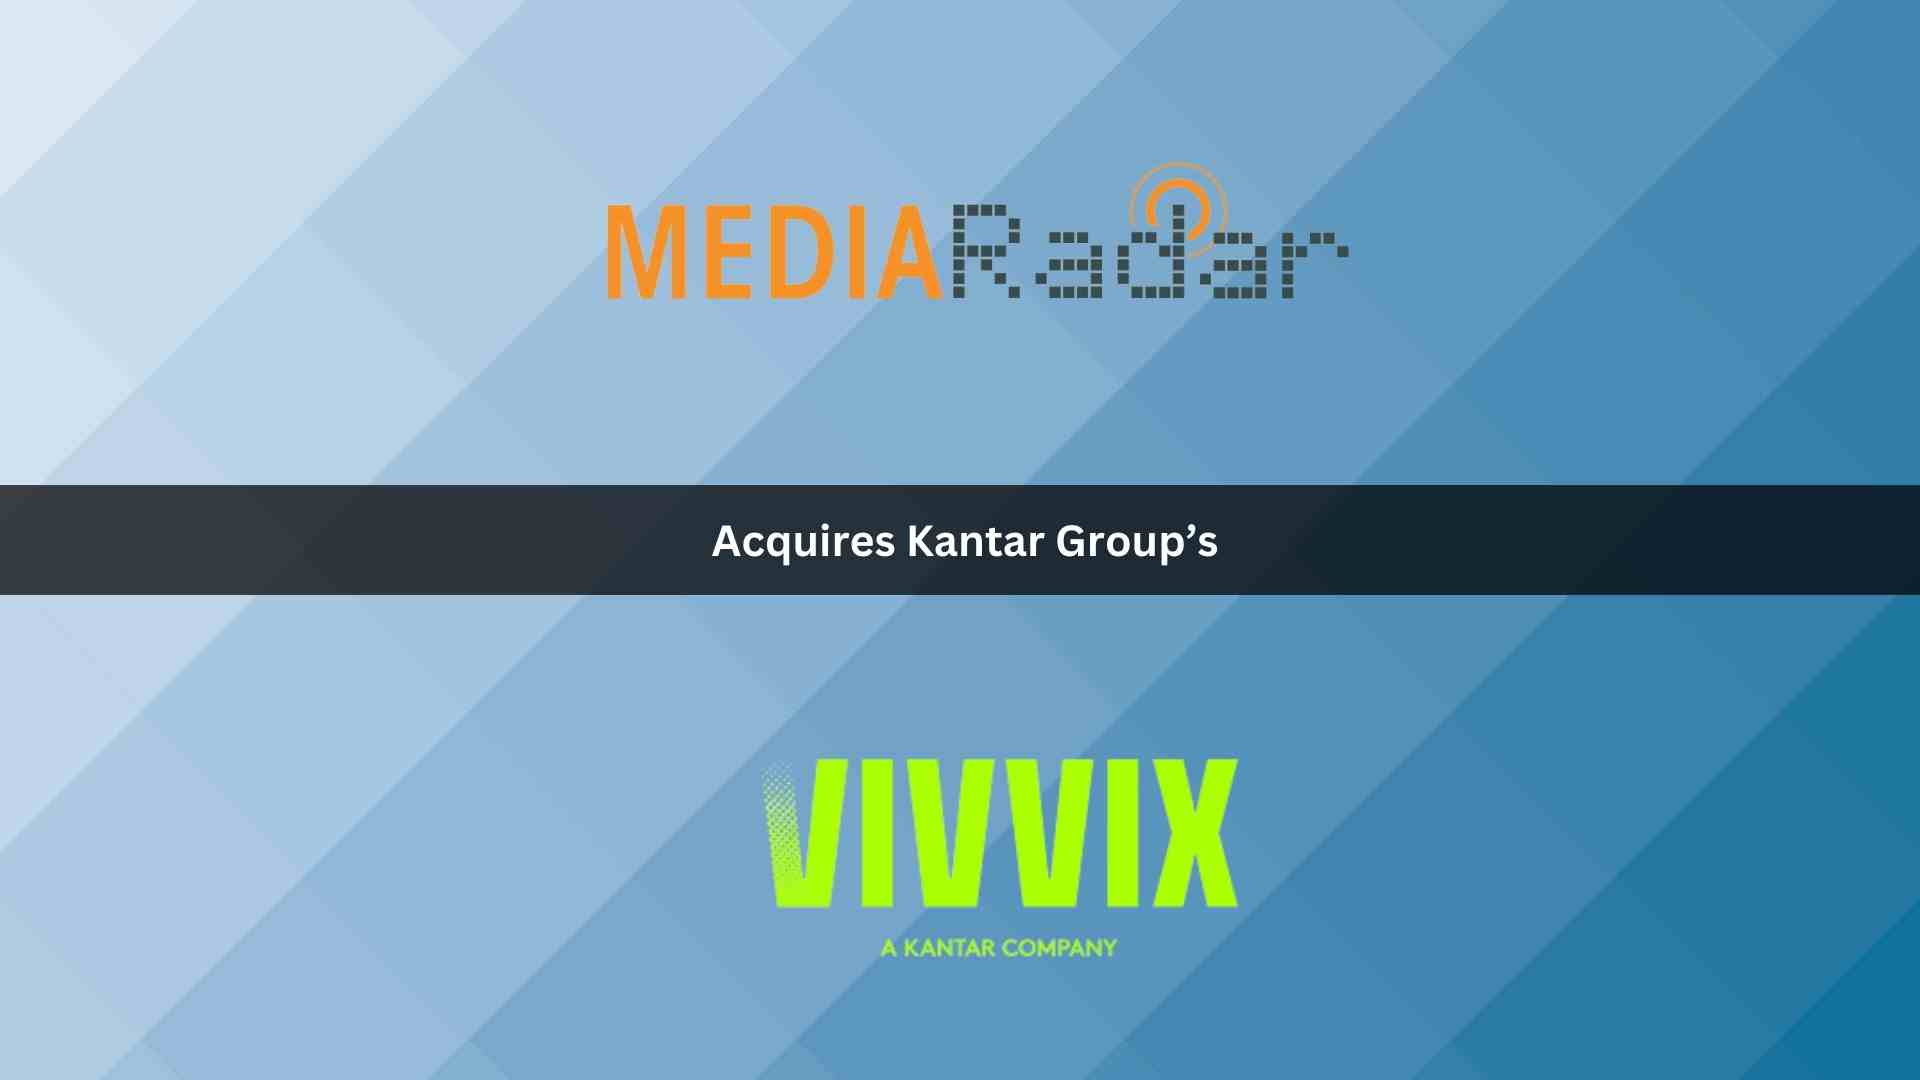 MediaRadar Acquires Kantar Group’s Vivvix to Offer a Comprehensive View of the Advertising Industry